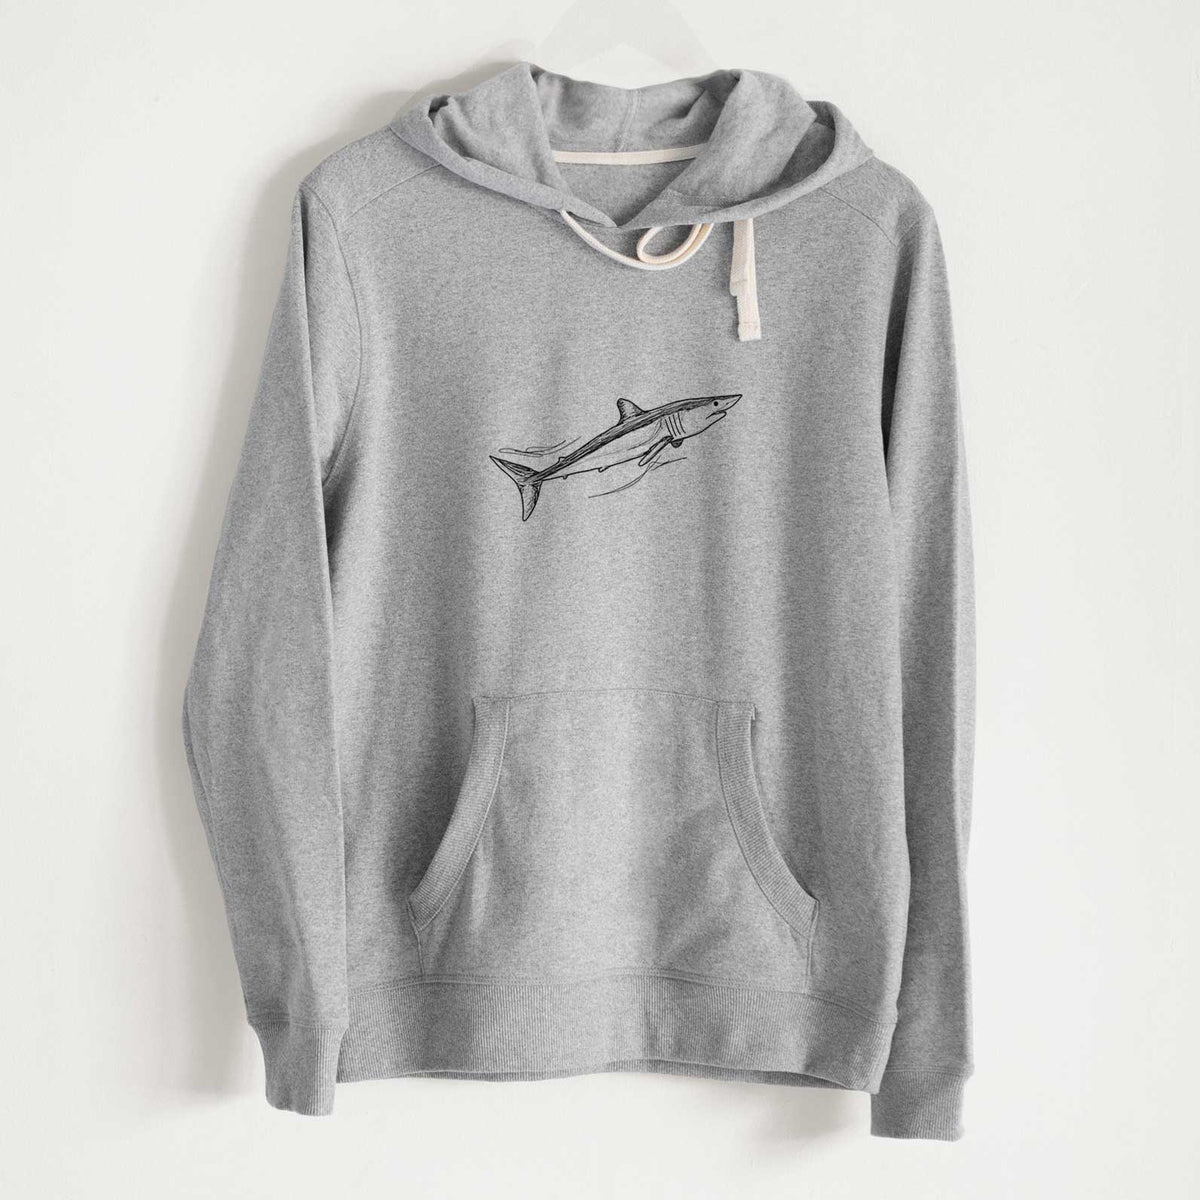 Mako Shark - Unisex Recycled Hoodie - CLOSEOUT - FINAL SALE